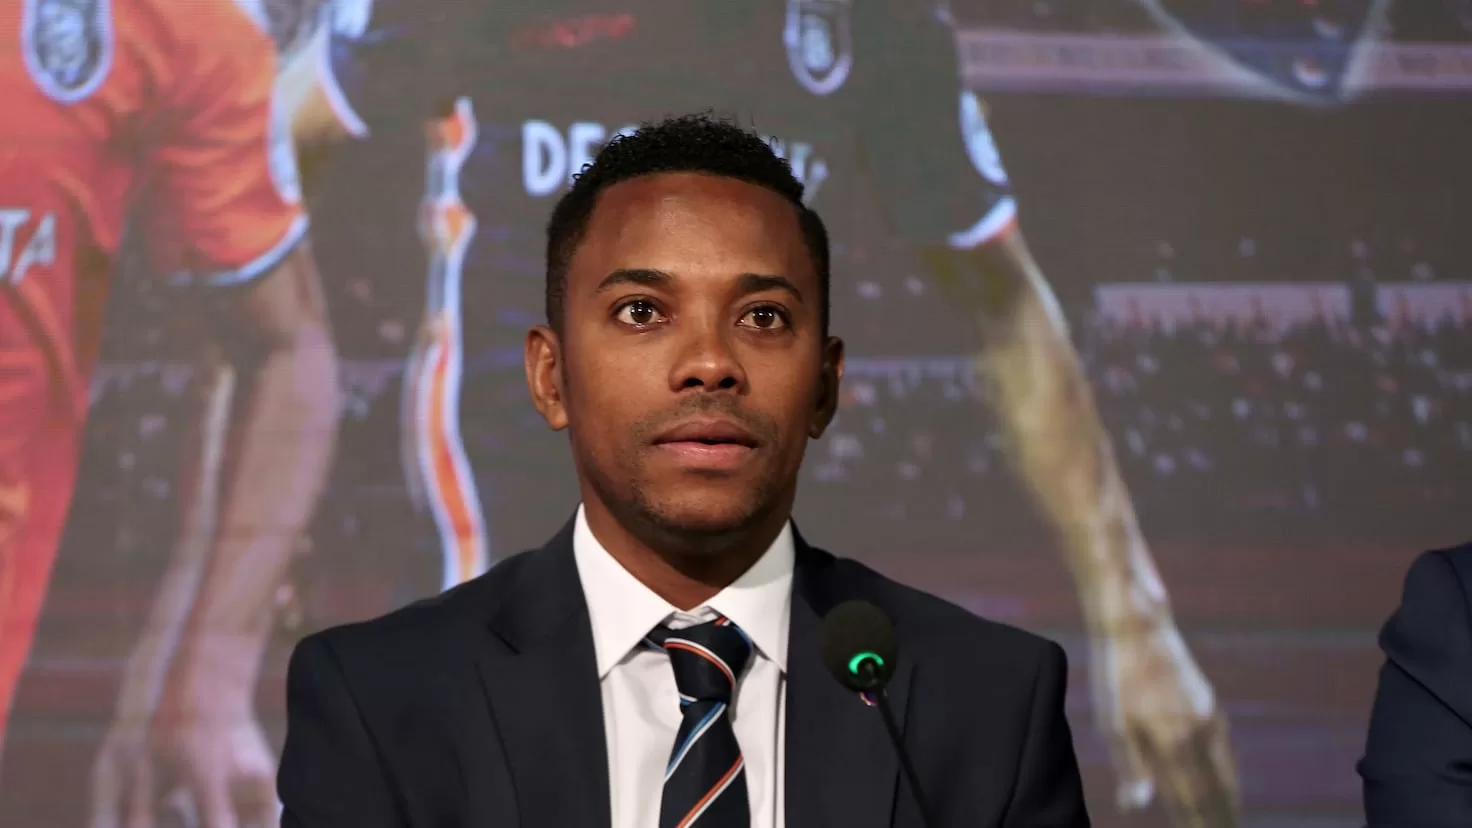 A friend of Robinho comes to his defense: He didn't rape anyone, it was an orgy
